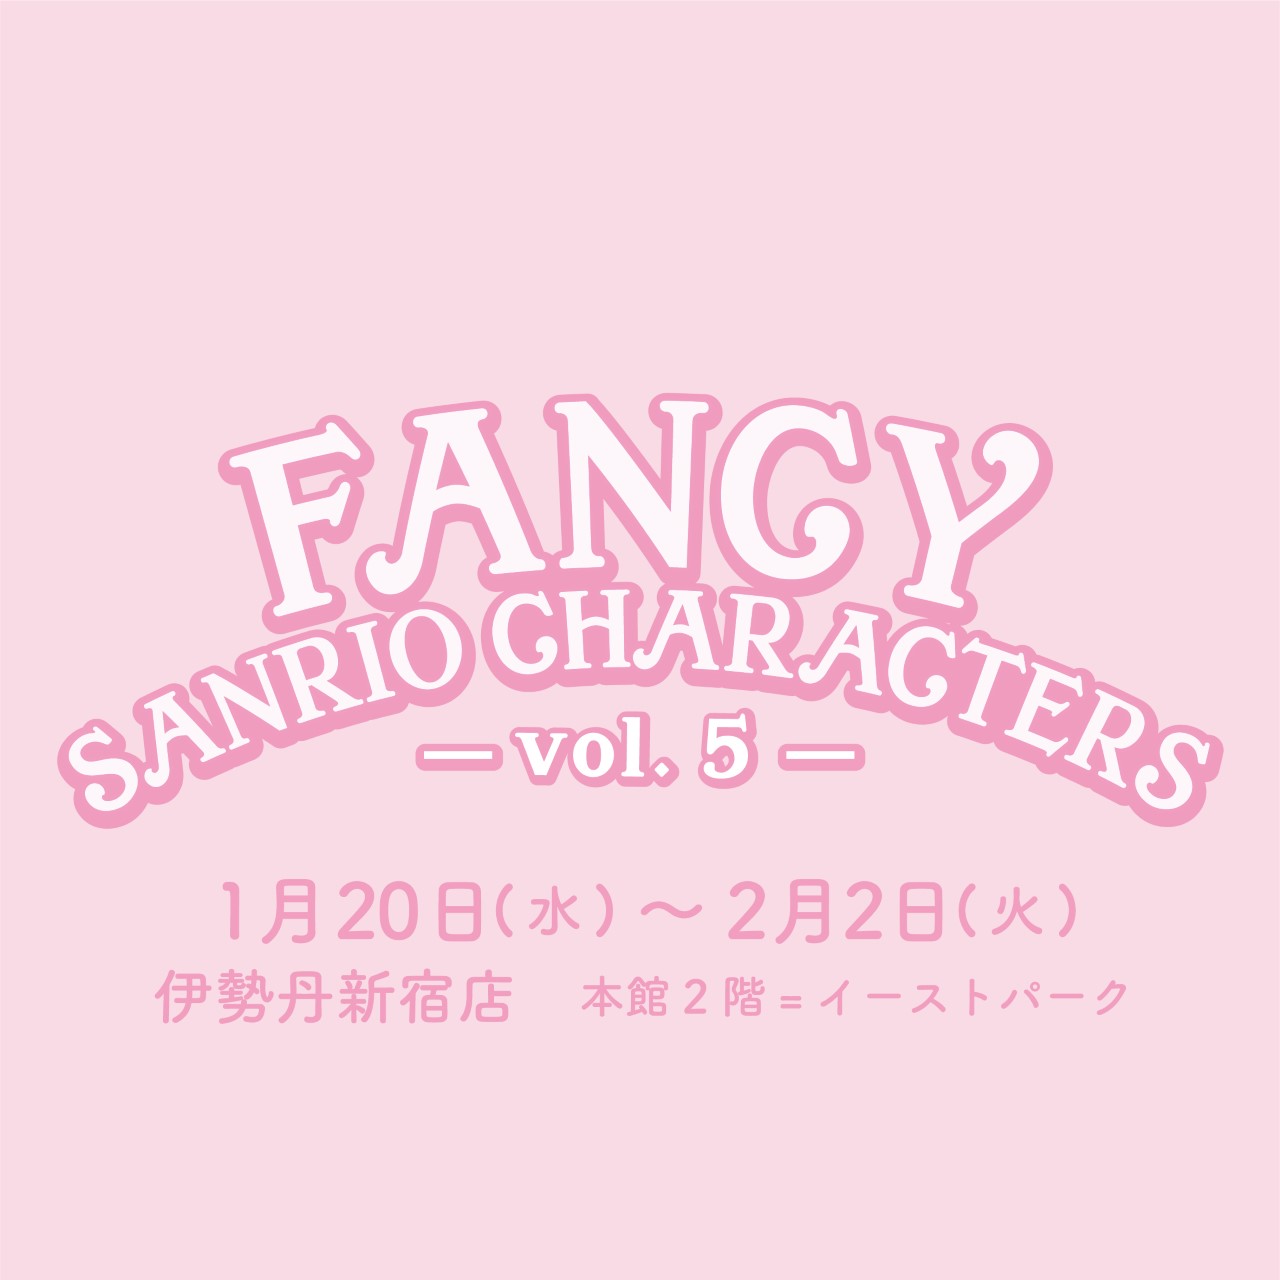 FANCY SANRIO CHARACTERS”vol.5 :: Shirley Temple